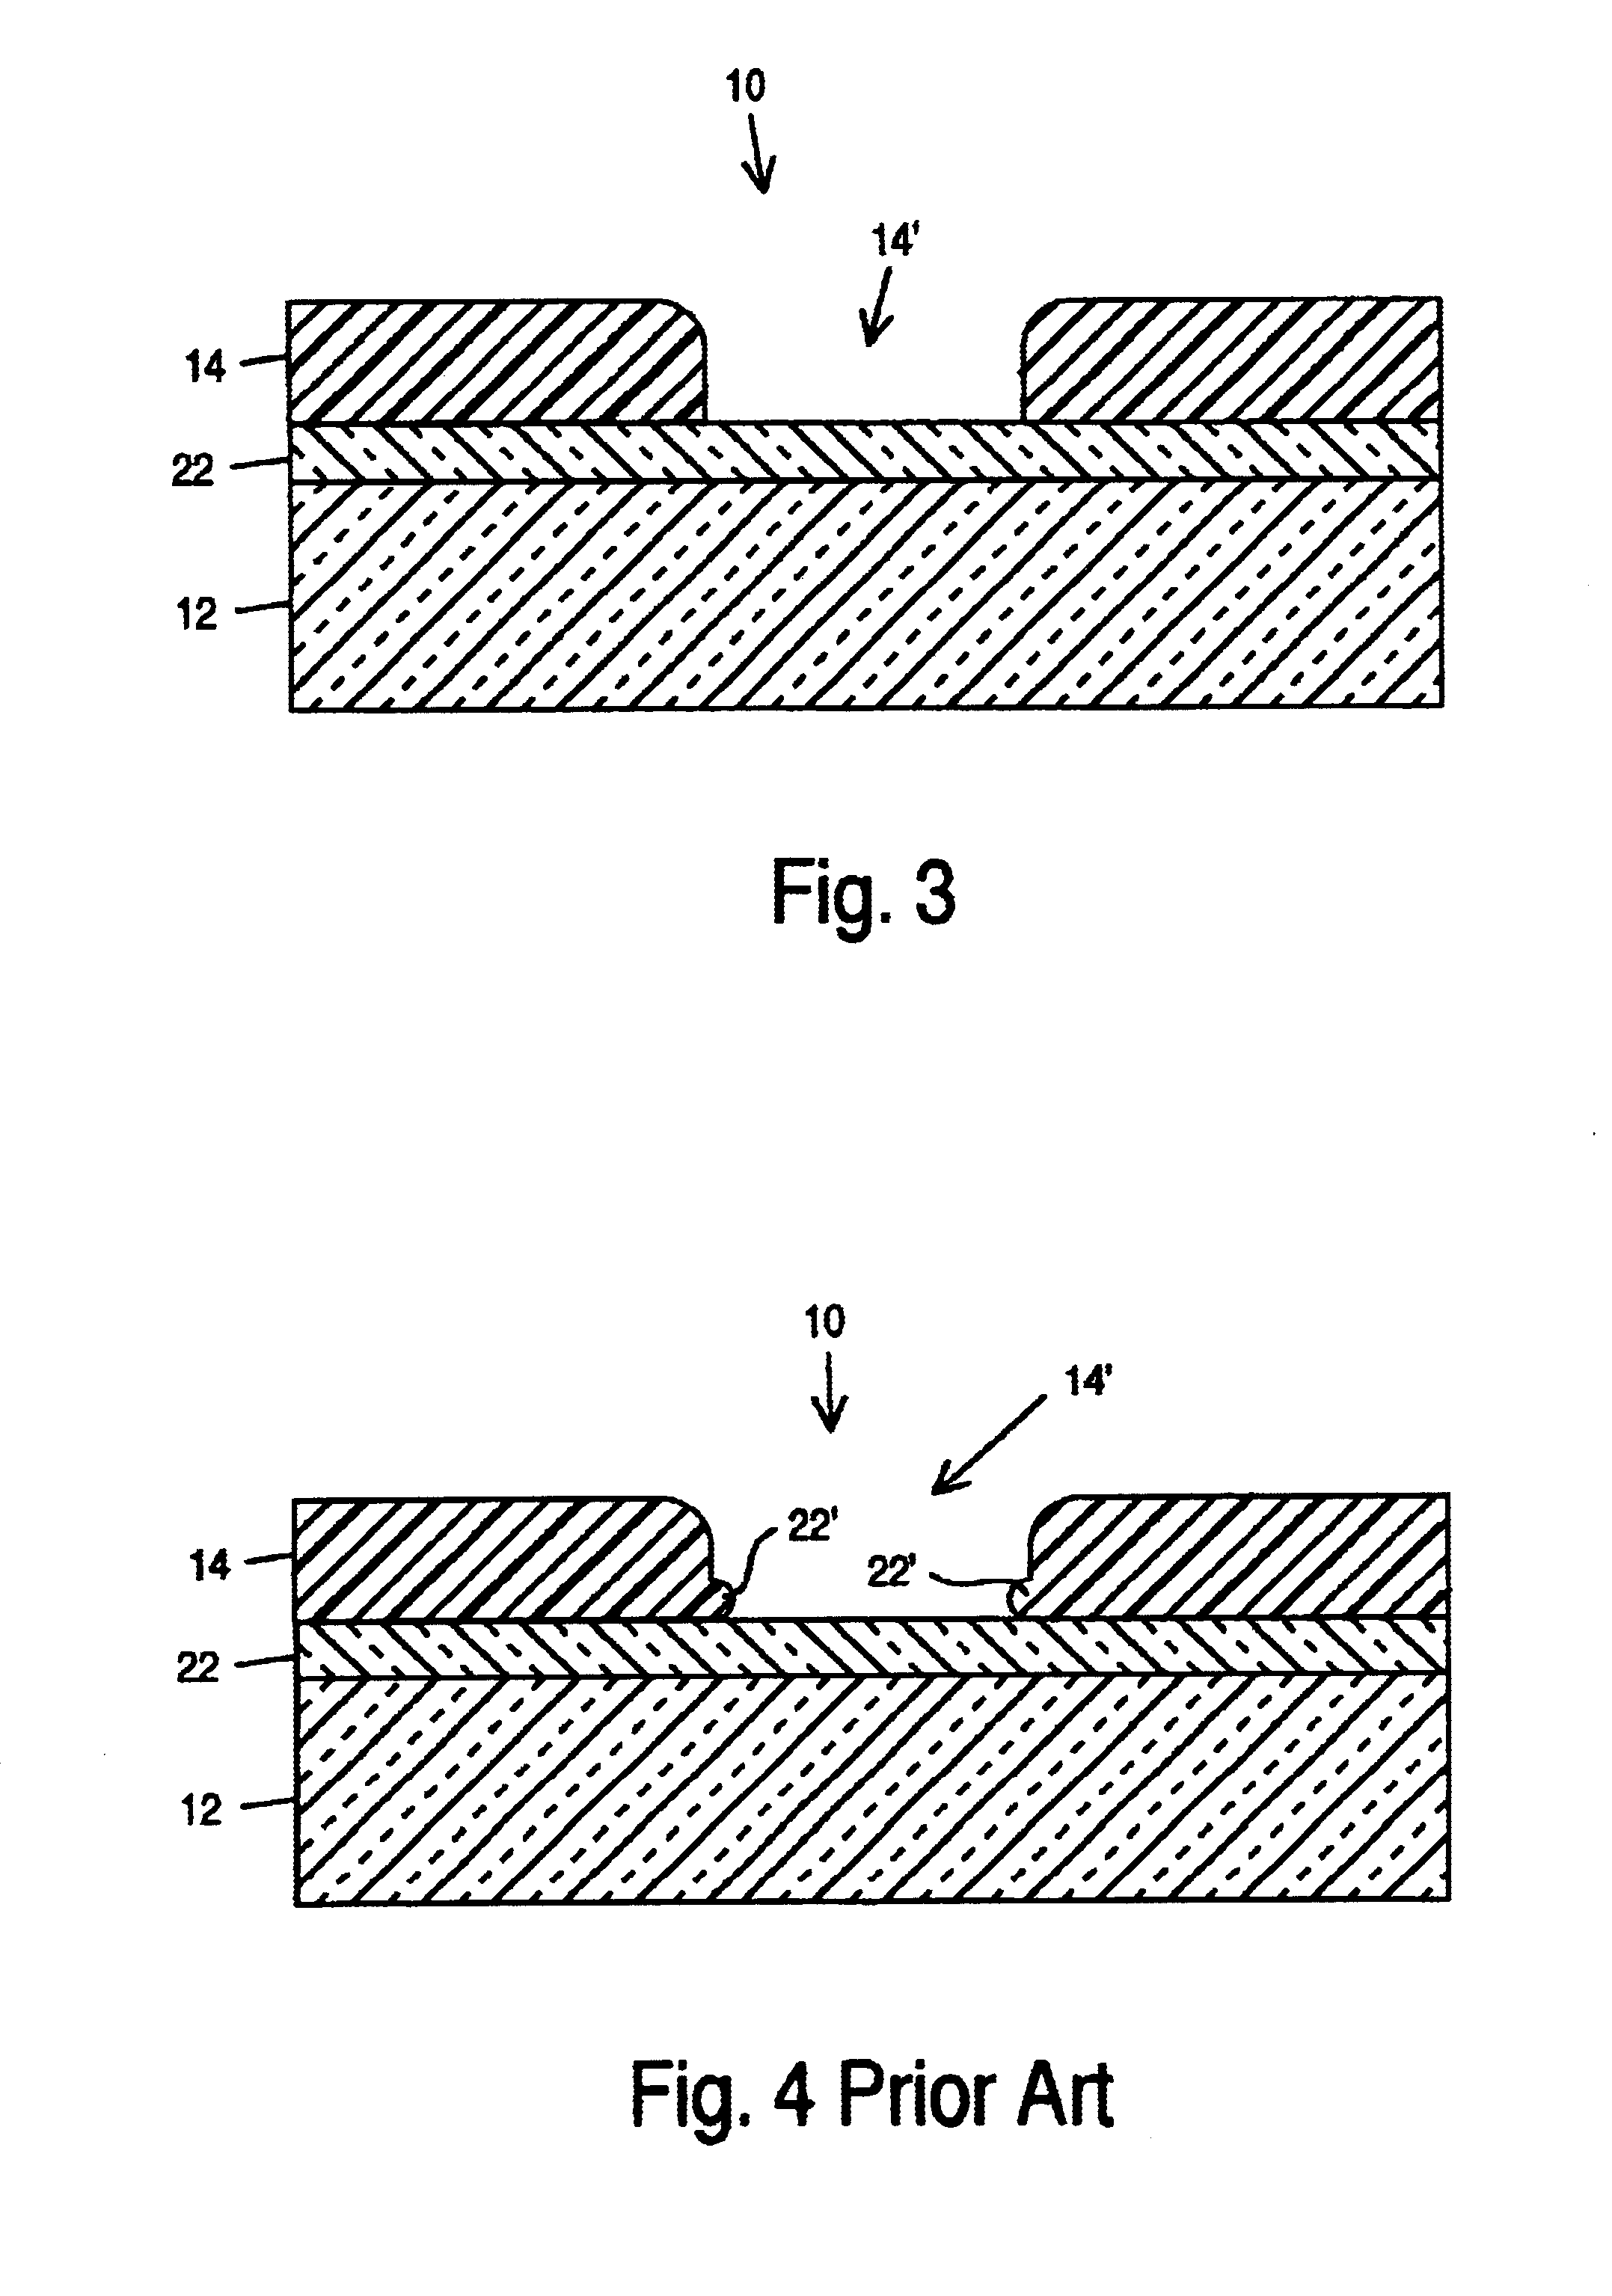 Process for forming bottom anti-reflection coating for semiconductor fabrication photolithography which inhibits photoresist footing